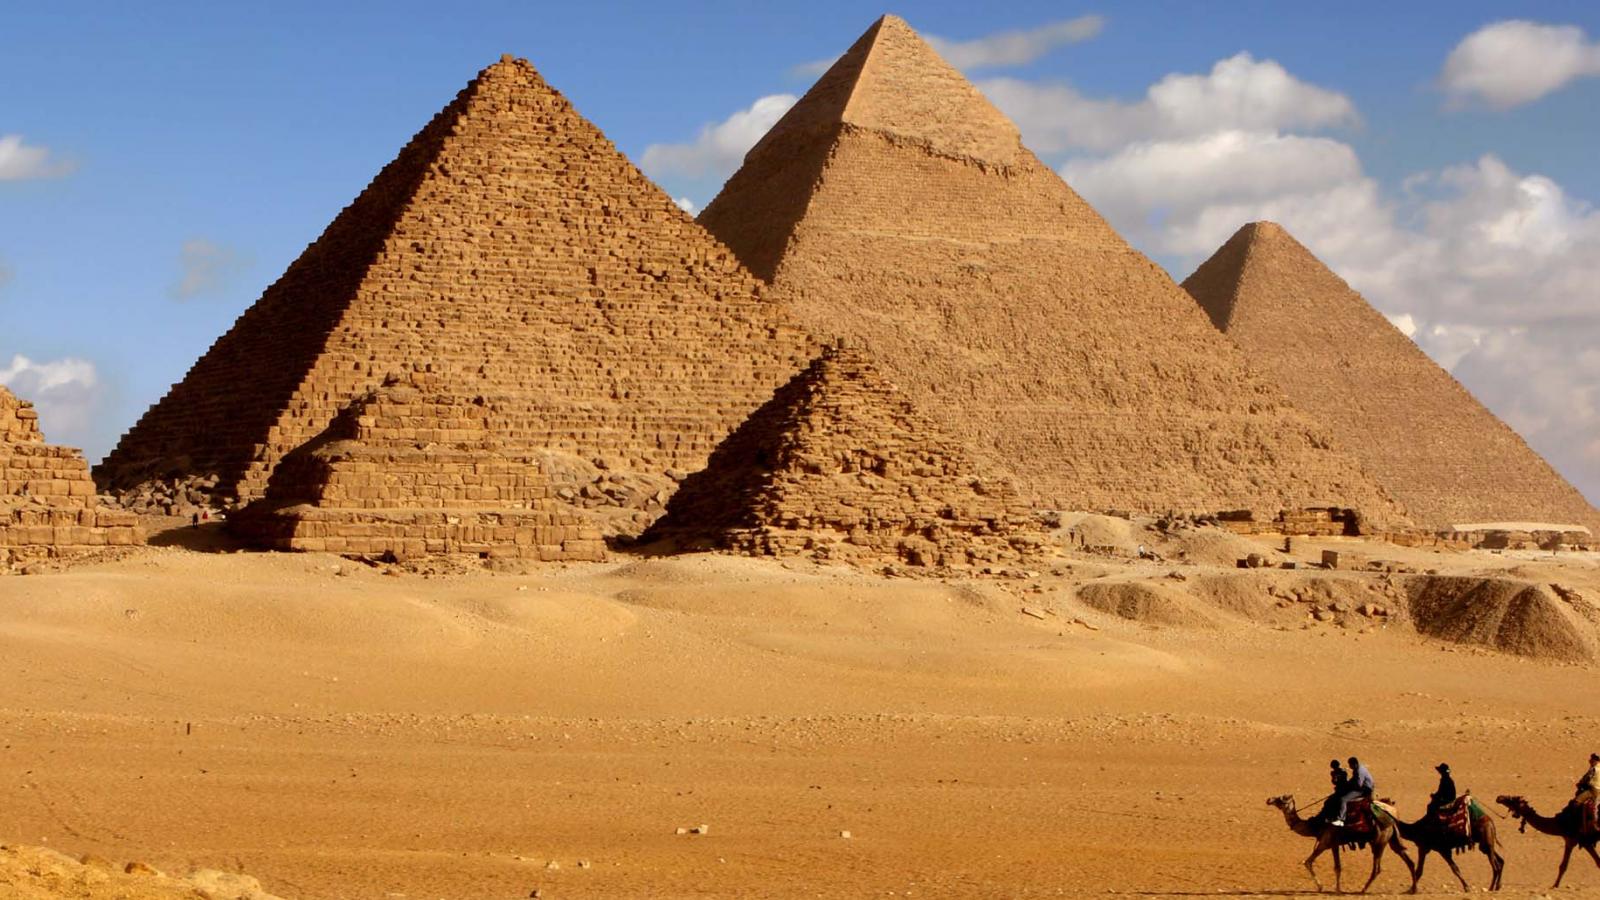 An insider’s guide to Egypt’s Pyramids of Giza